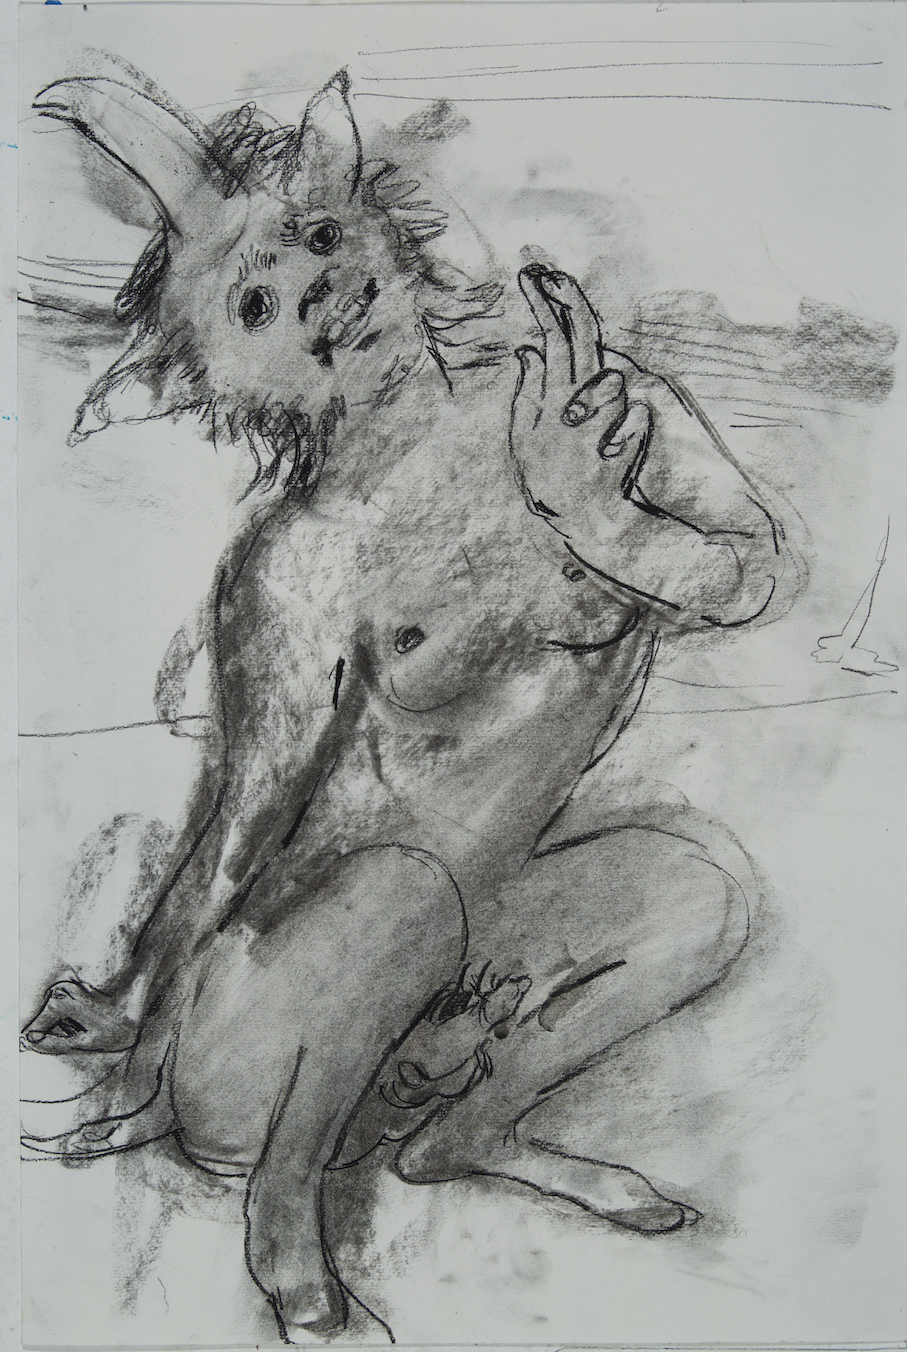 Wait for it charcoal 24 by 18 inches 2015 .jpg